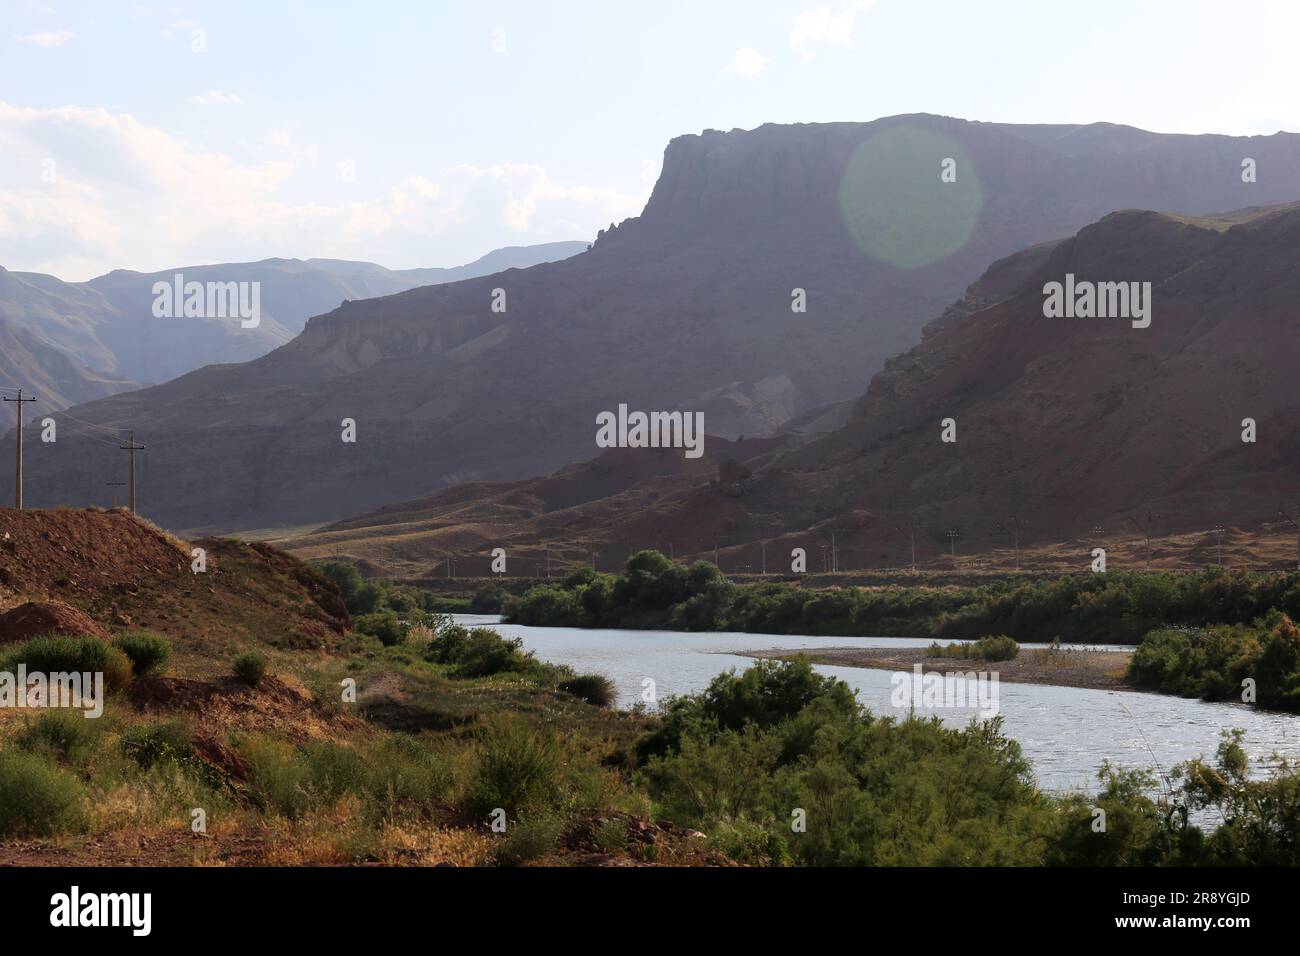 June 21, 2023, Jolfa, East Azerbaijan, Iran: A view of the Aras River at the border between northwestern Iran and Azerbaijan. The Aras (the Araks, Arax, Araxes, or Araz) is a river in the Caucasus. It rises in eastern Turkey and flows along the borders between Turkey and Armenia, between Turkey and the Nakhchivan exclave of Azerbaijan, between Iran and both Azerbaijan and Armenia, and, finally, through Azerbaijan where it flows into the Kura River. It drains the south side of the Lesser Caucasus Mountains while the Kura drains the north side of the Lesser Caucasus. The river's total length is Stock Photo